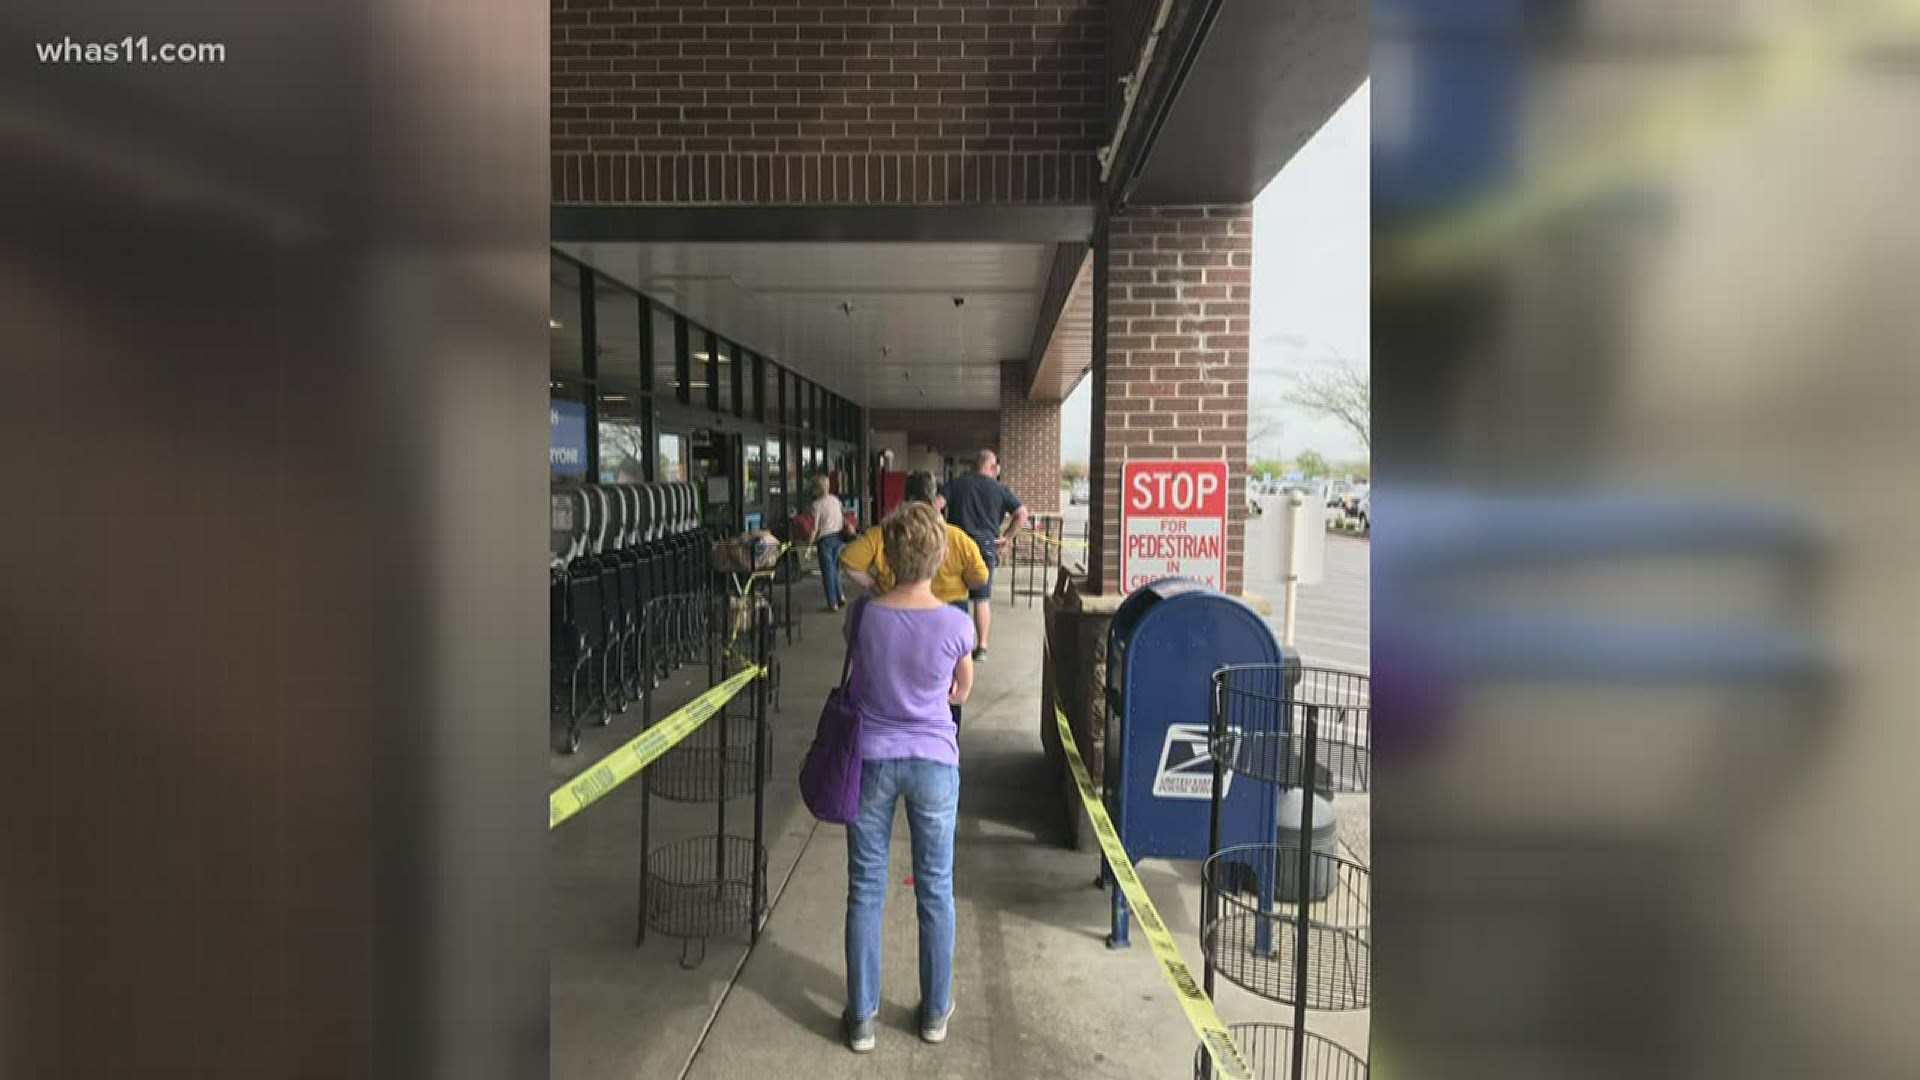 They are workers on the front line, and now thirteen employees within Kroger's Louisville Division have tested positive for COVID19.